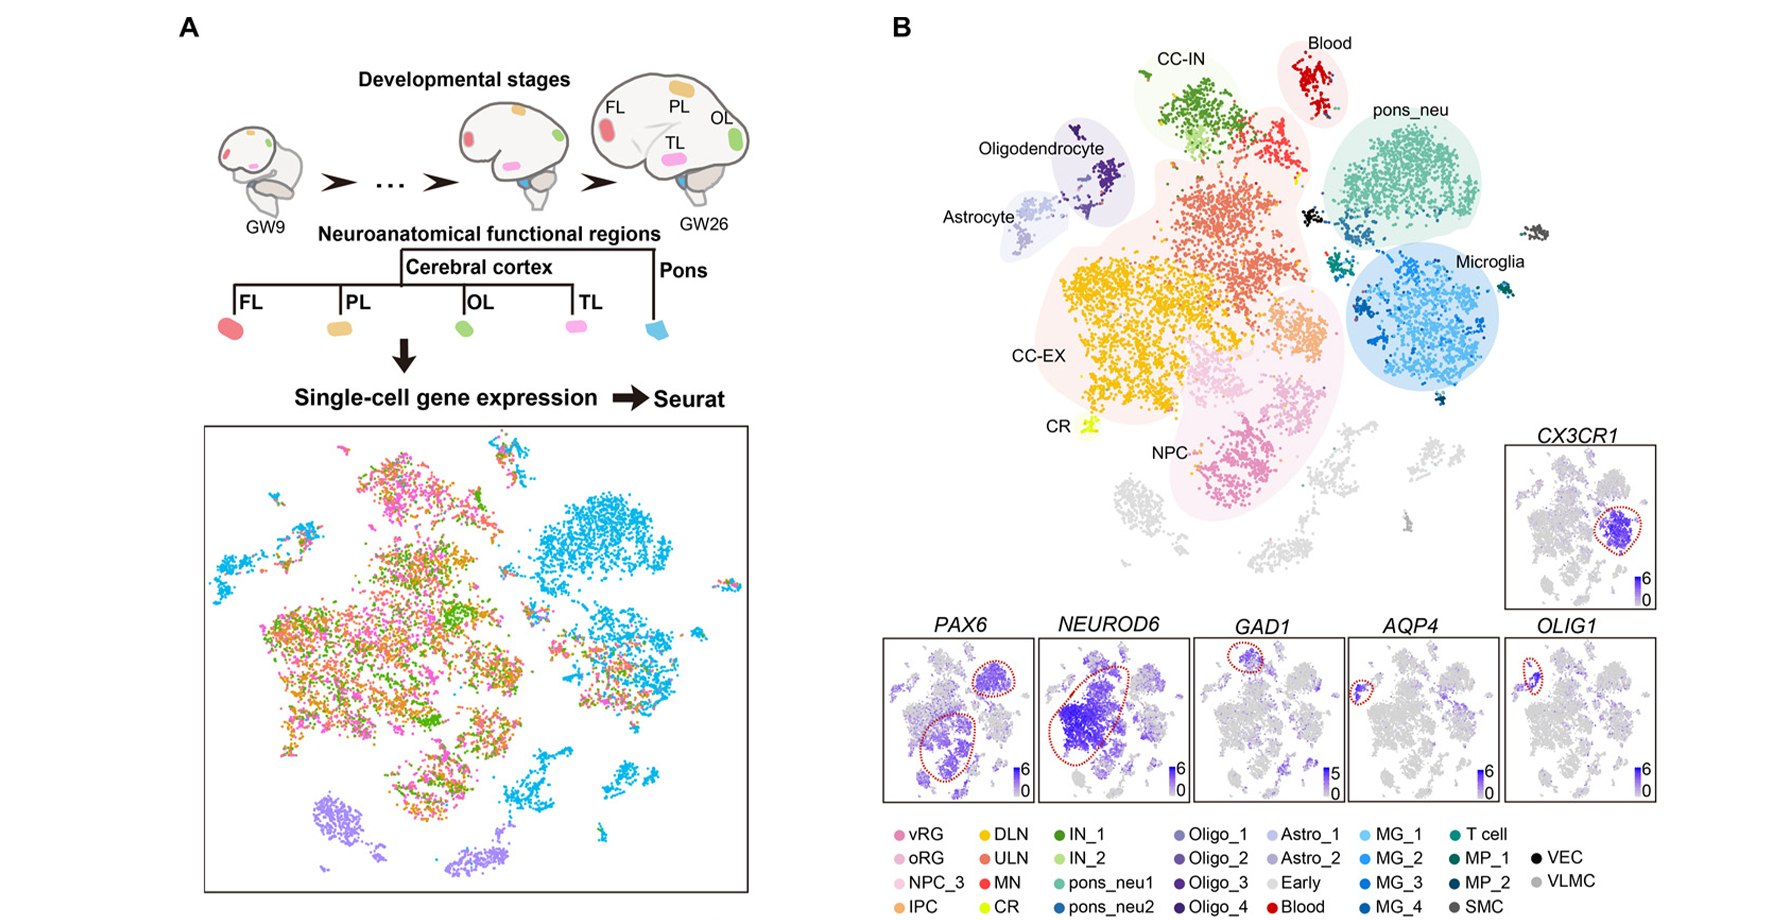 Single-cell transcriptome analysis reveals cell lineage specification in temporal spatial patterns in human cortical development.